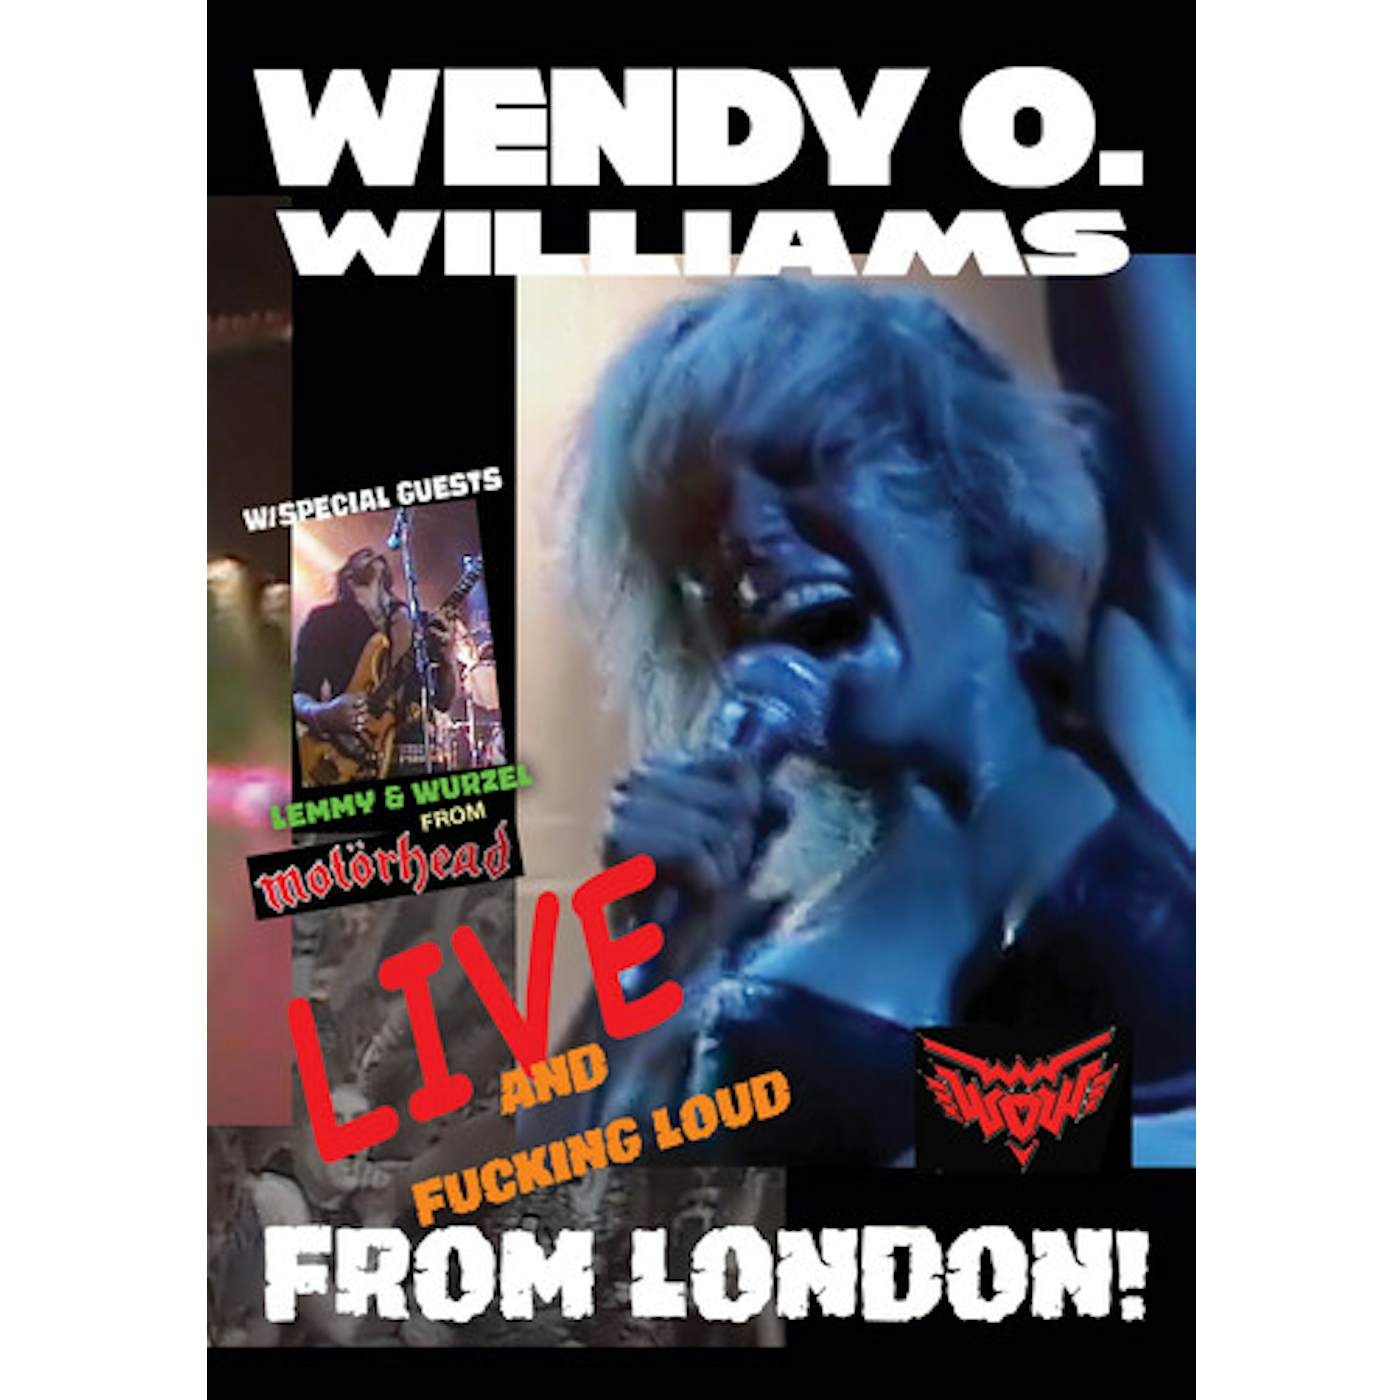 Wendy O. Williams WOW: LIVE AND FUCKING LOUD FROM LONDON DVD